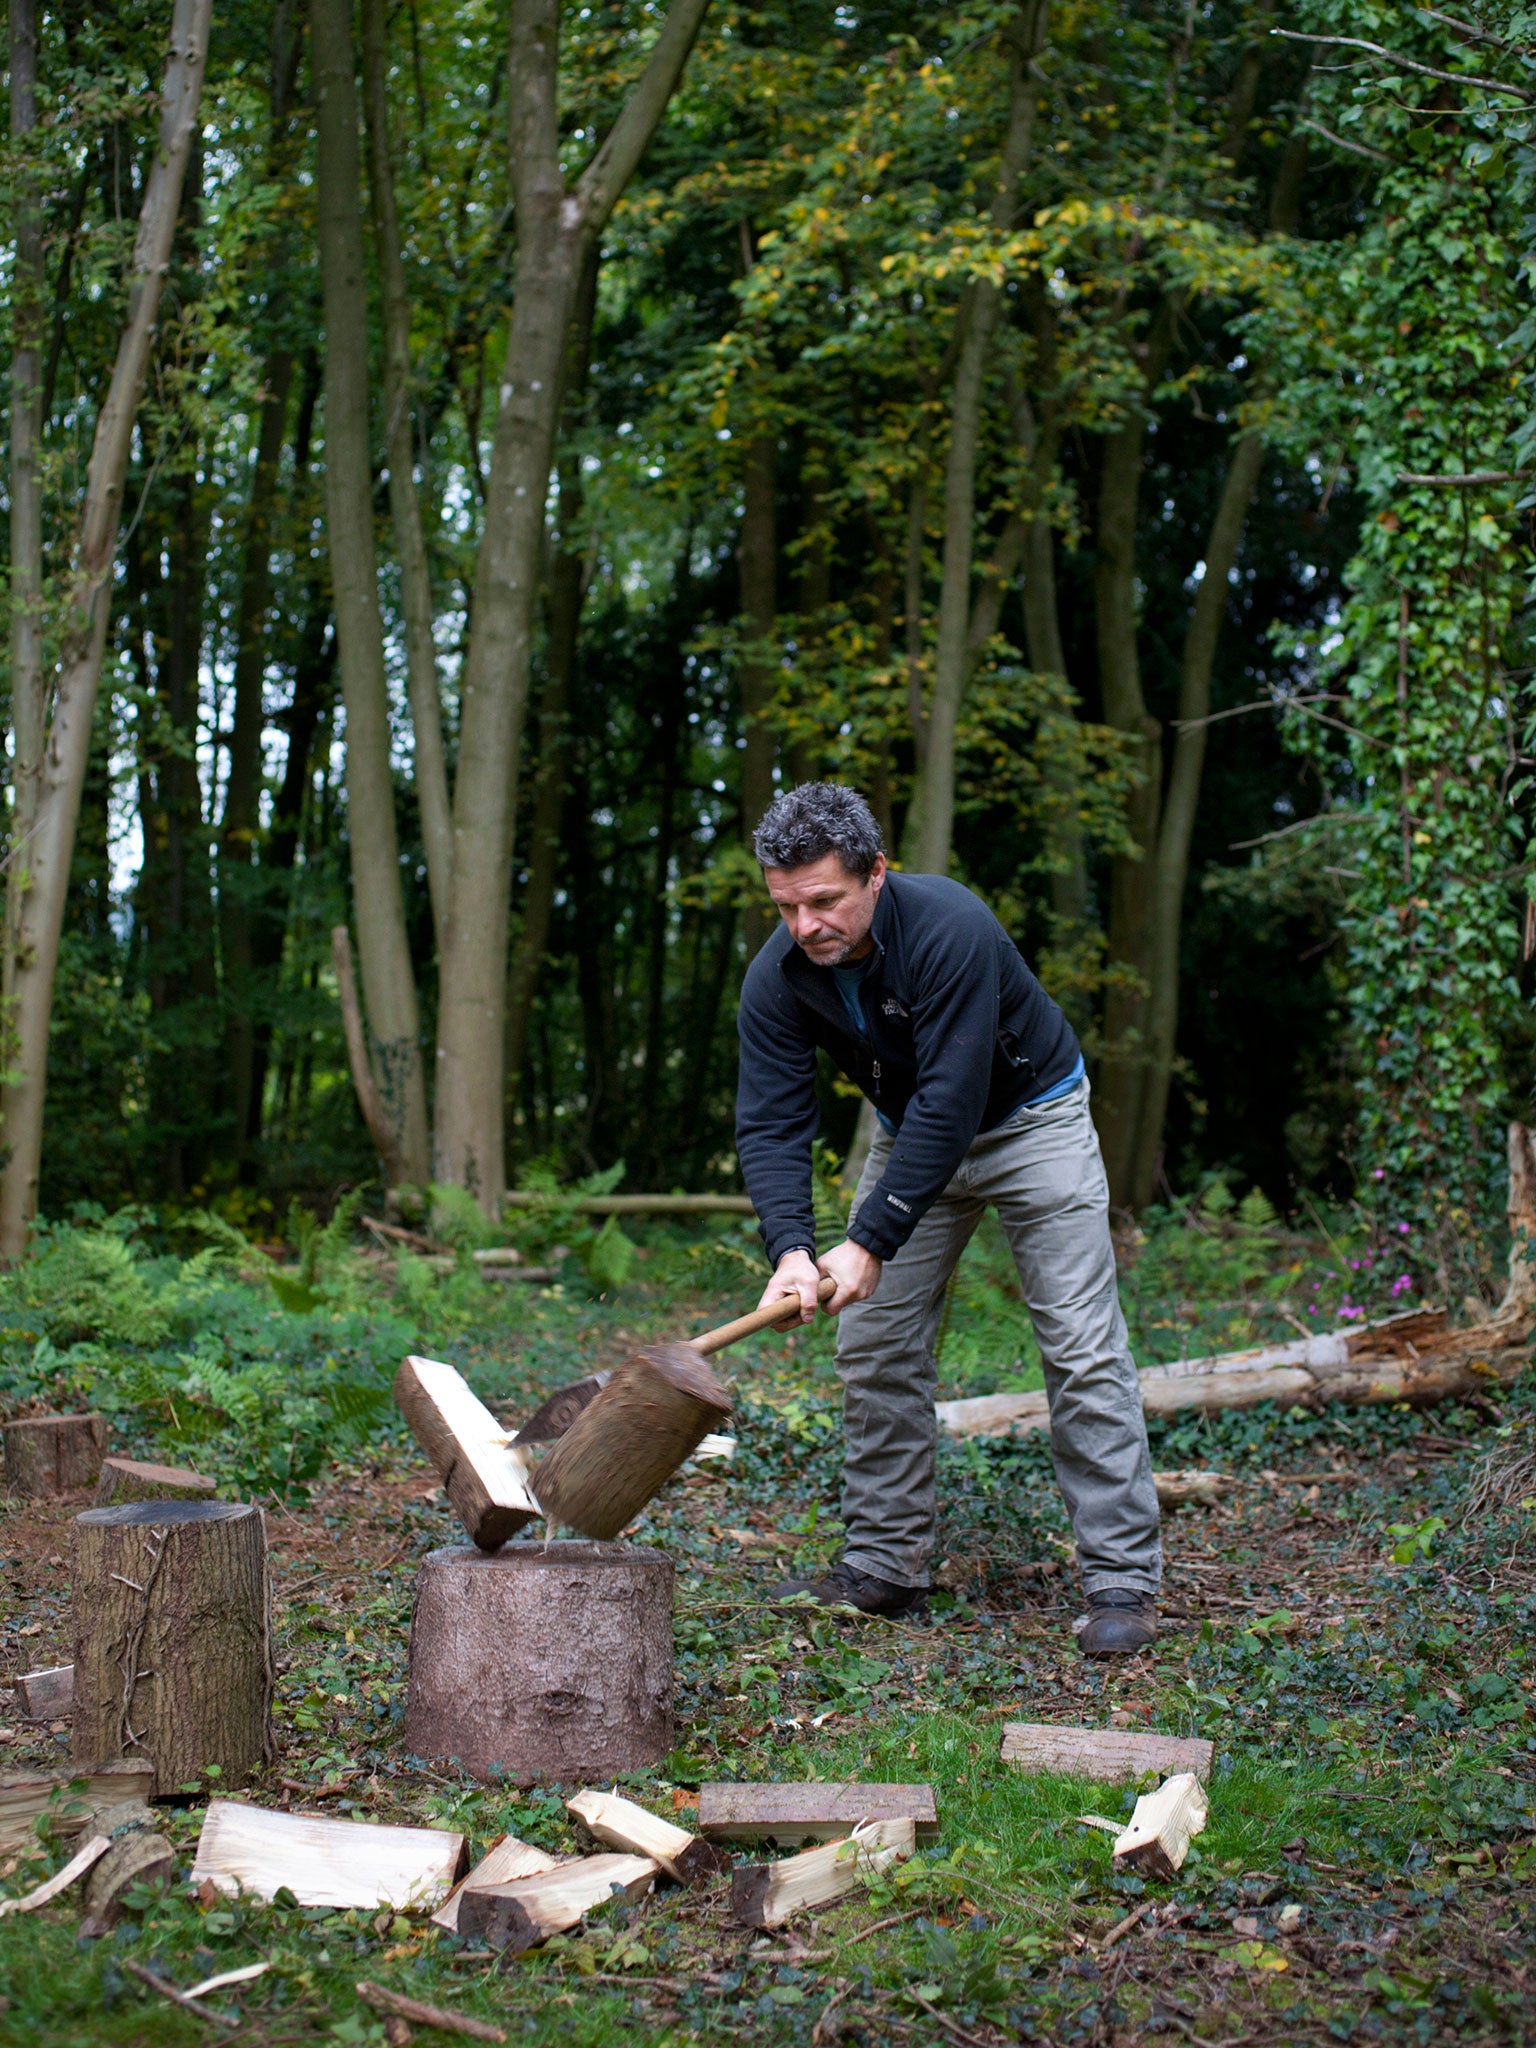 ‘The part of the cycle I enjoy most is splitting logs with an axe. I'm not entirely sure why this is so, but I'm not alone in relishing axe-work’